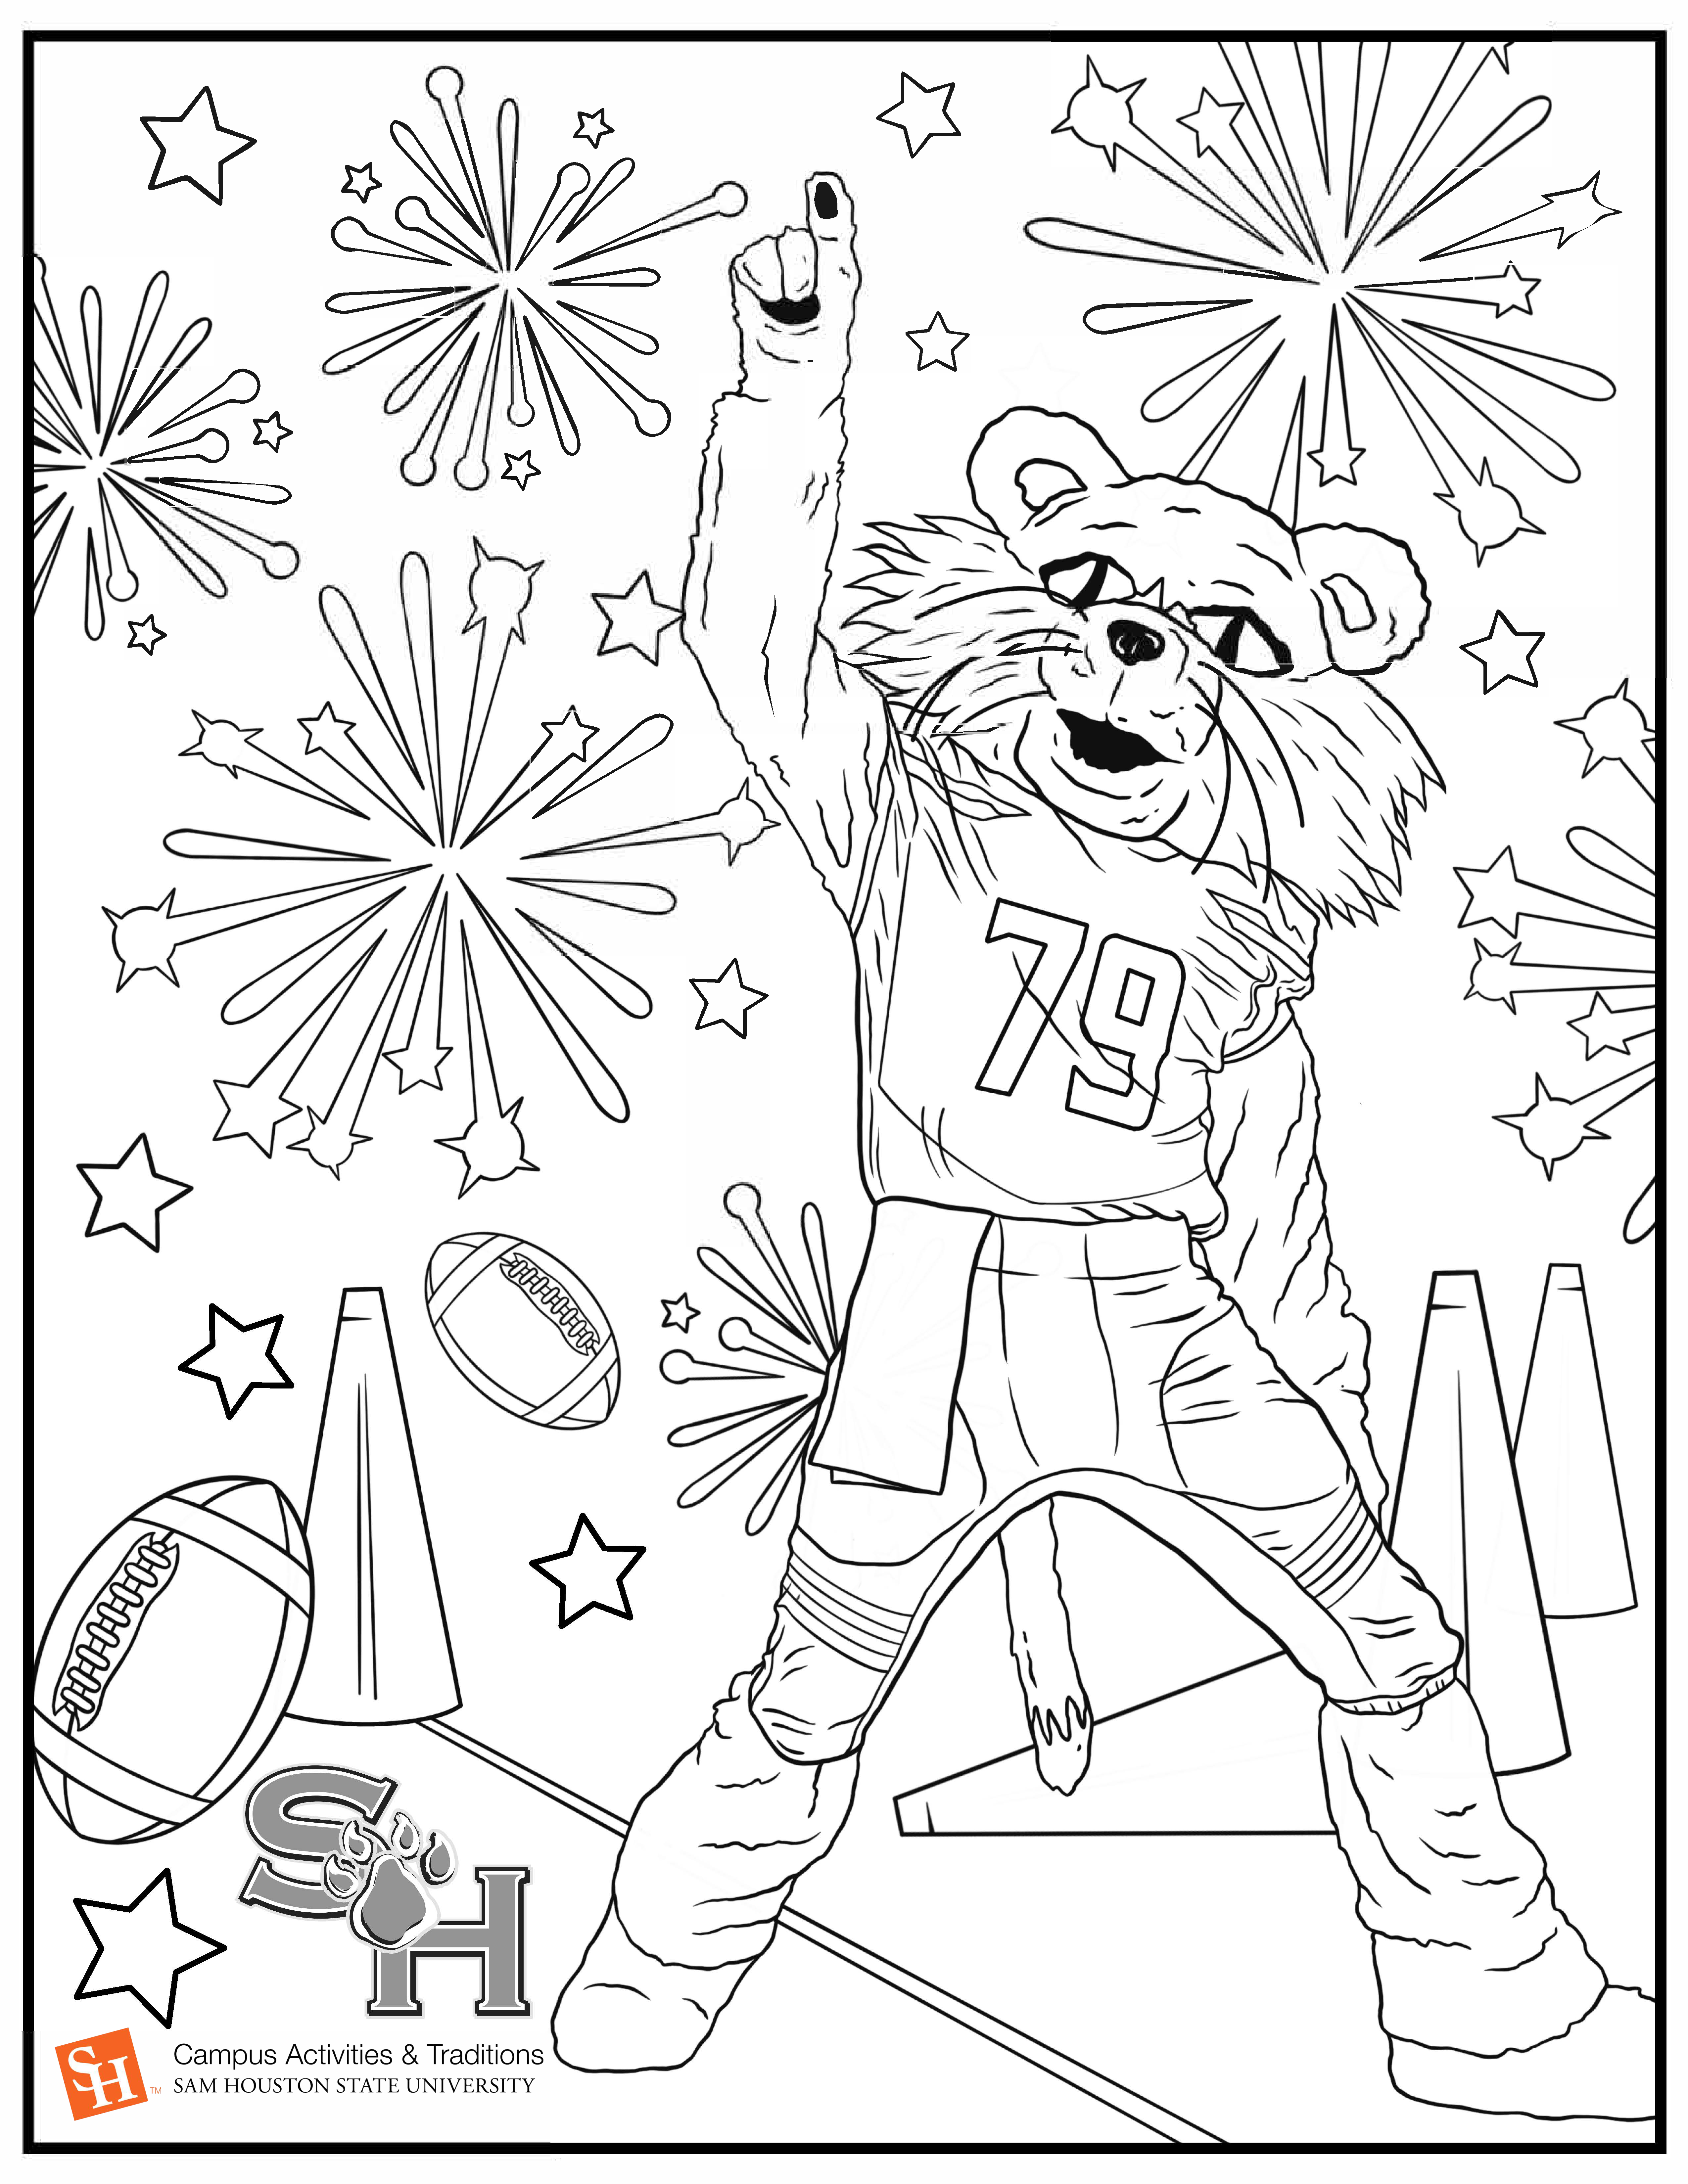 Student Activities Coloring Sheets_Page_2.png